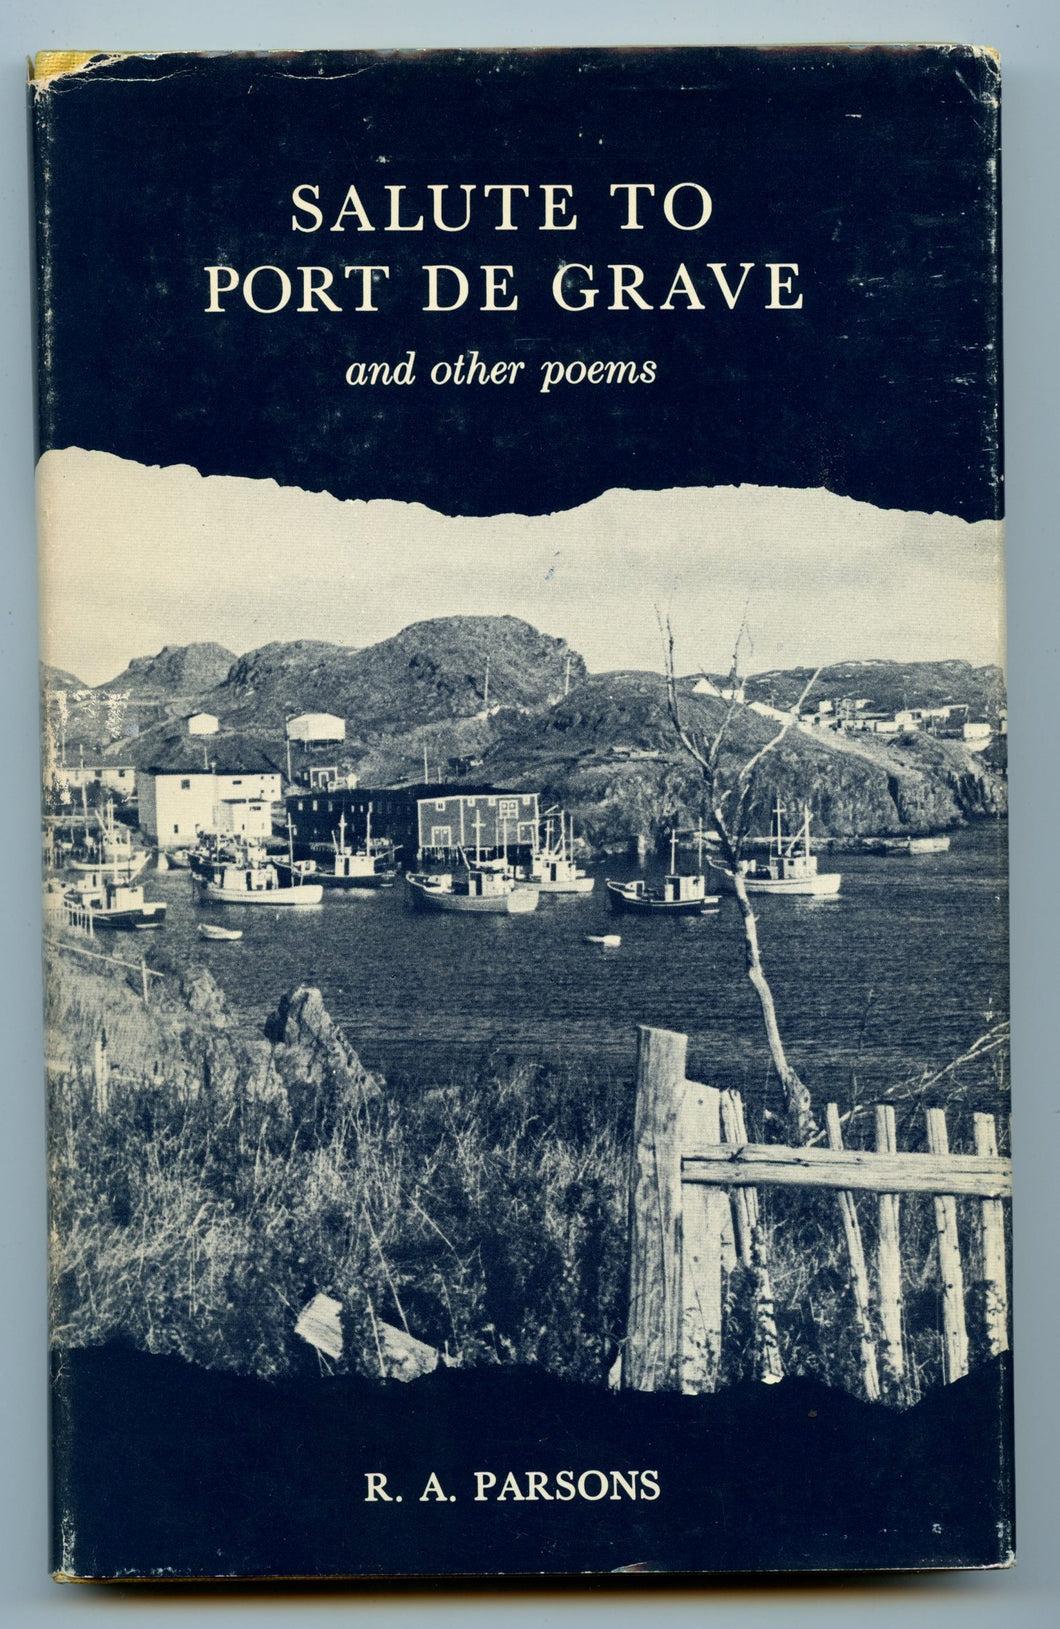 Salute to Port de Grave and other poems